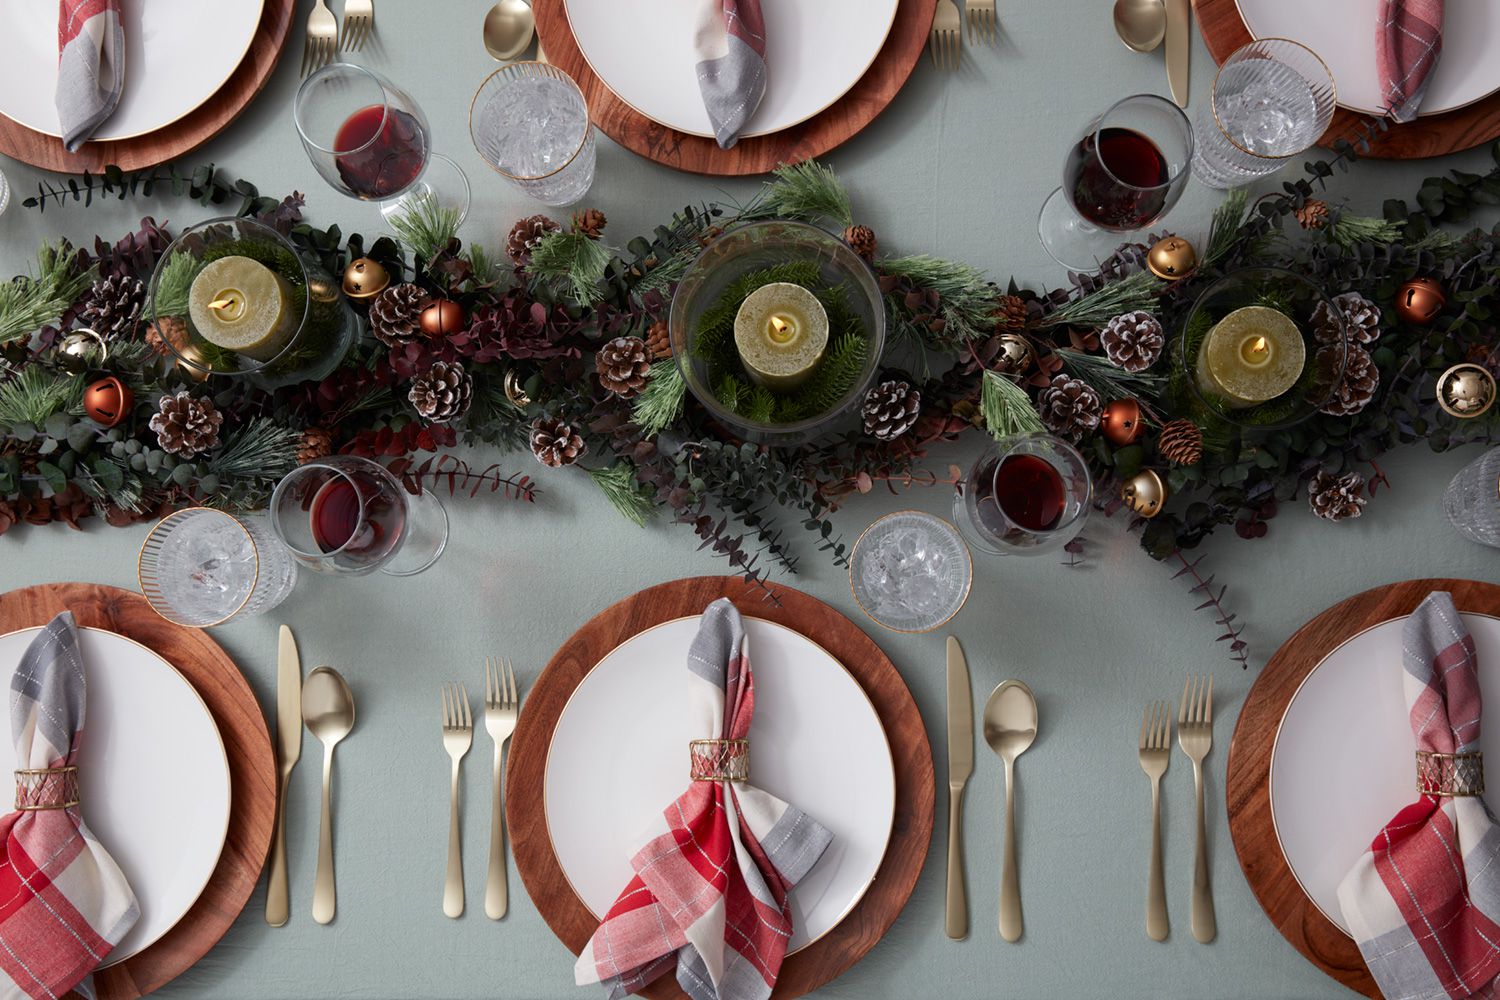 44 Christmas Table Decorating Ideas for Holiday Cheer